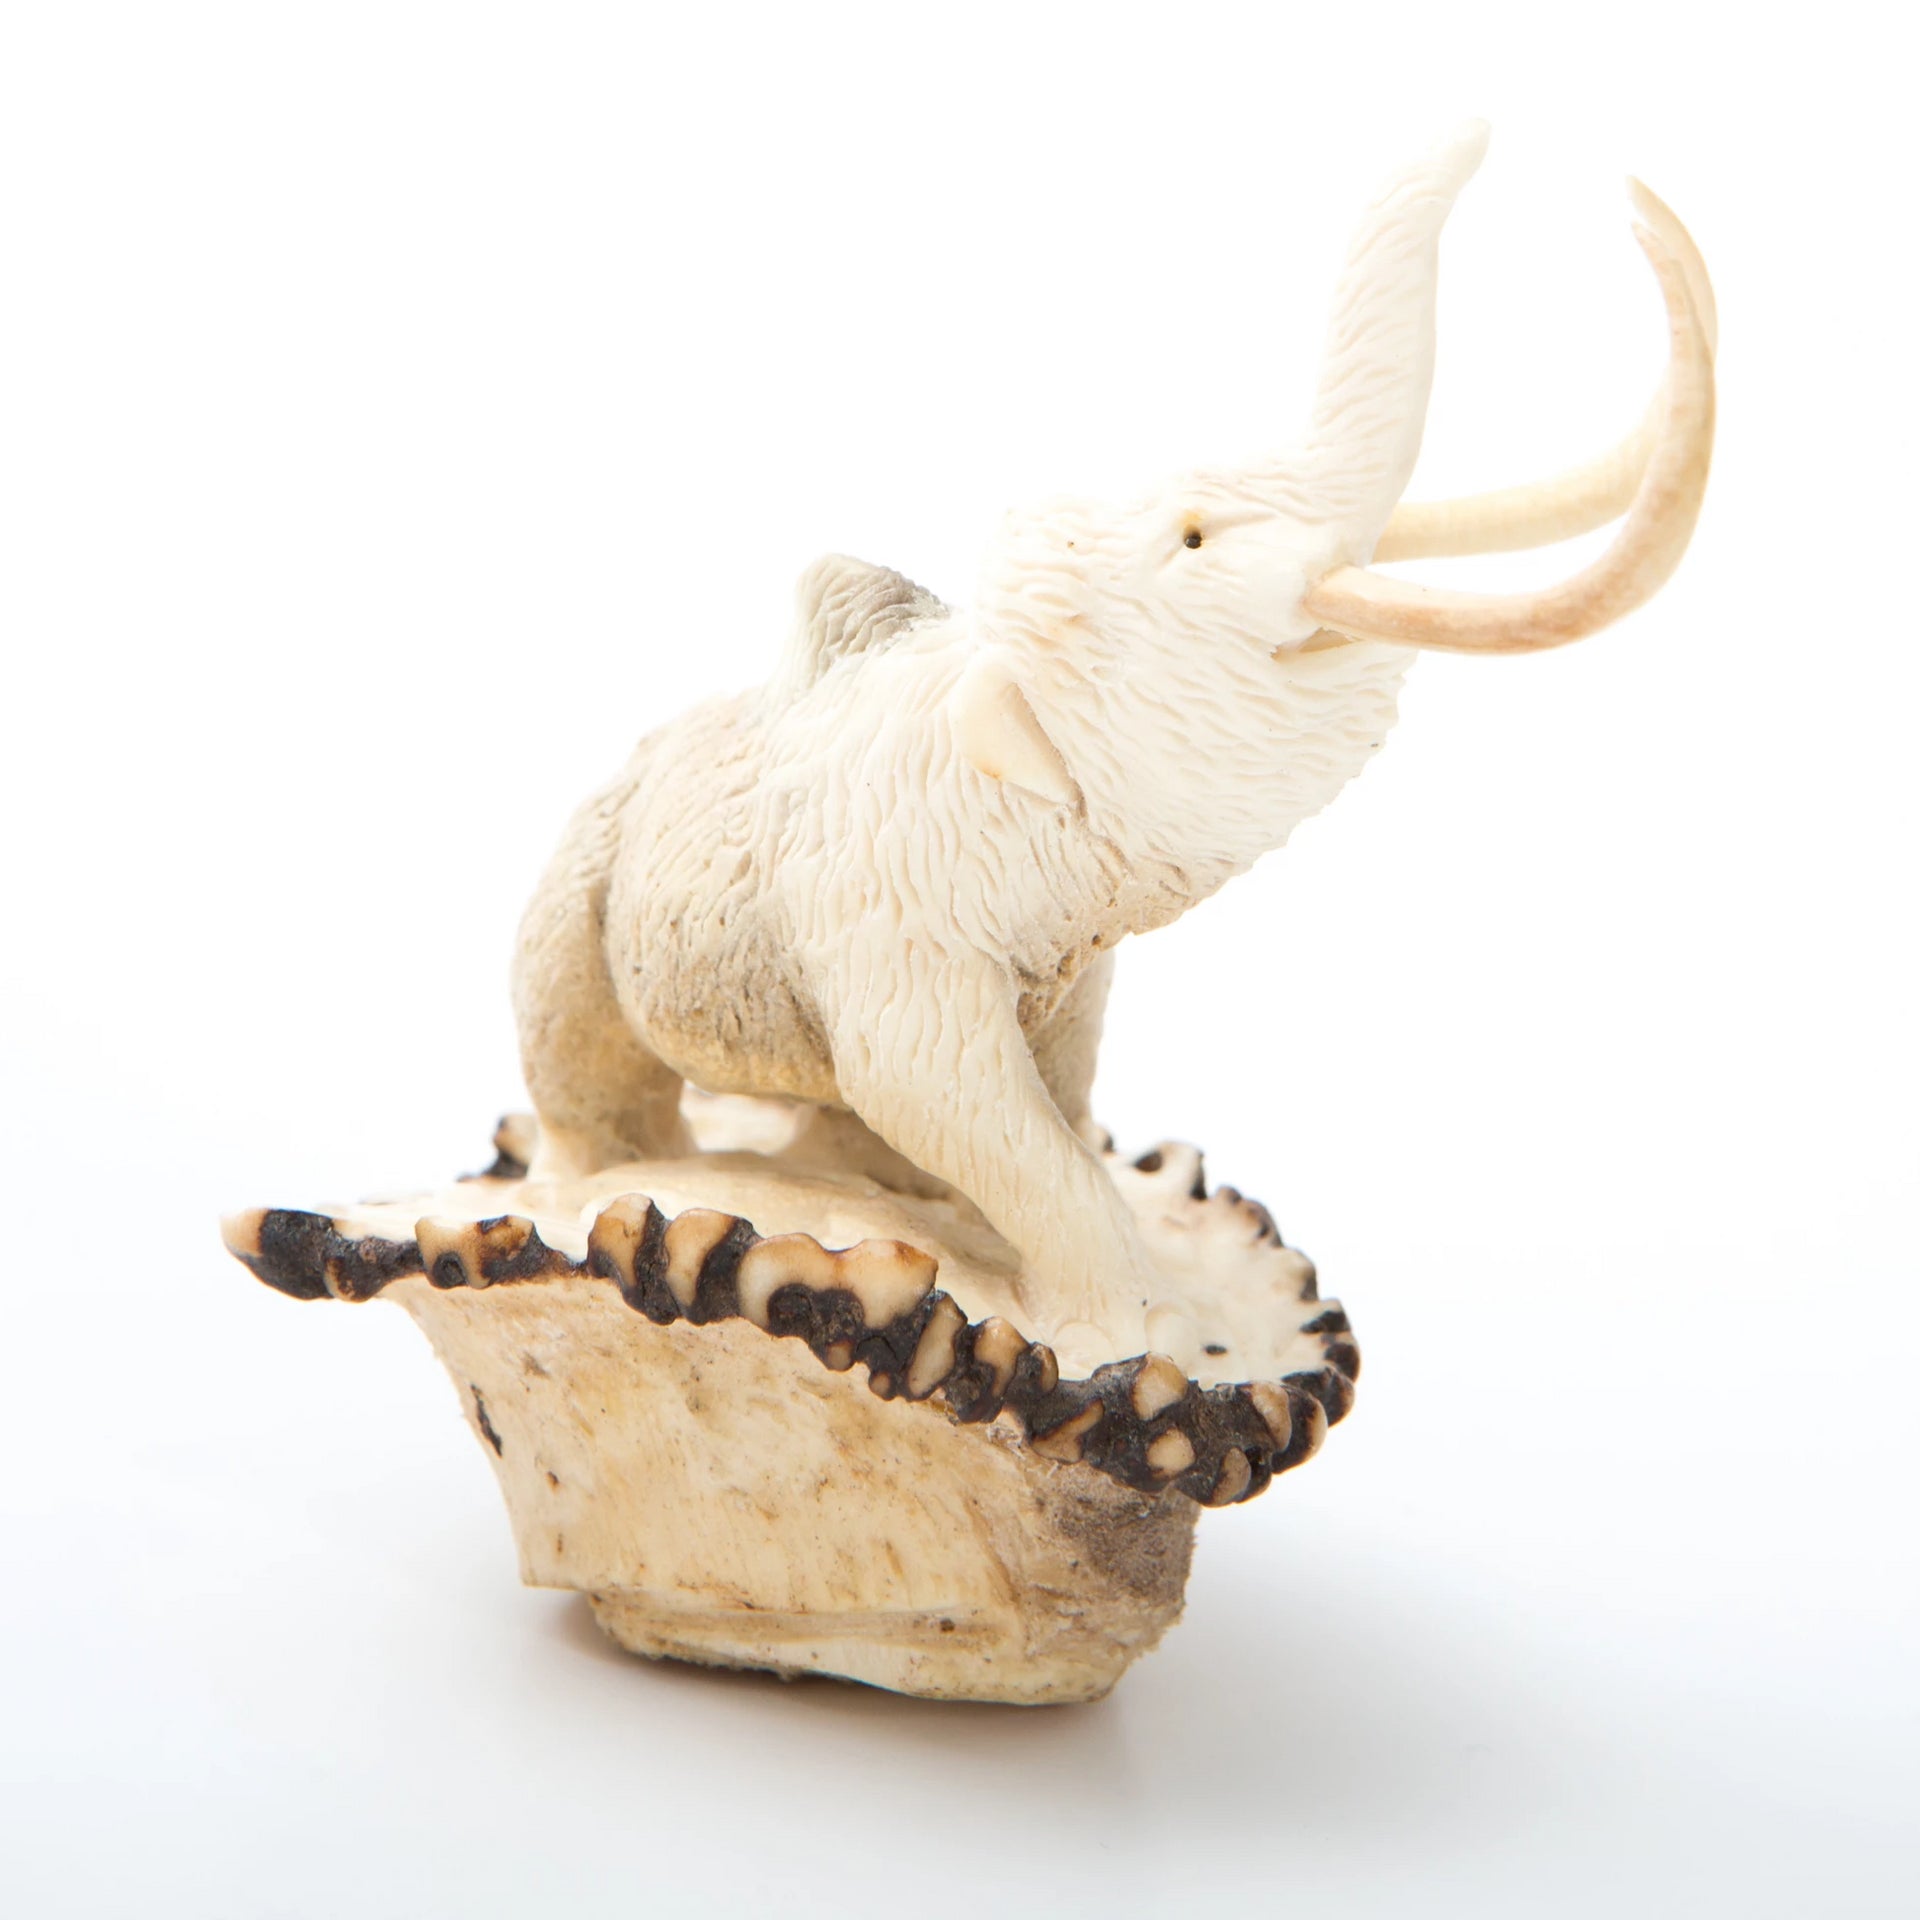 Carved mammoth with base